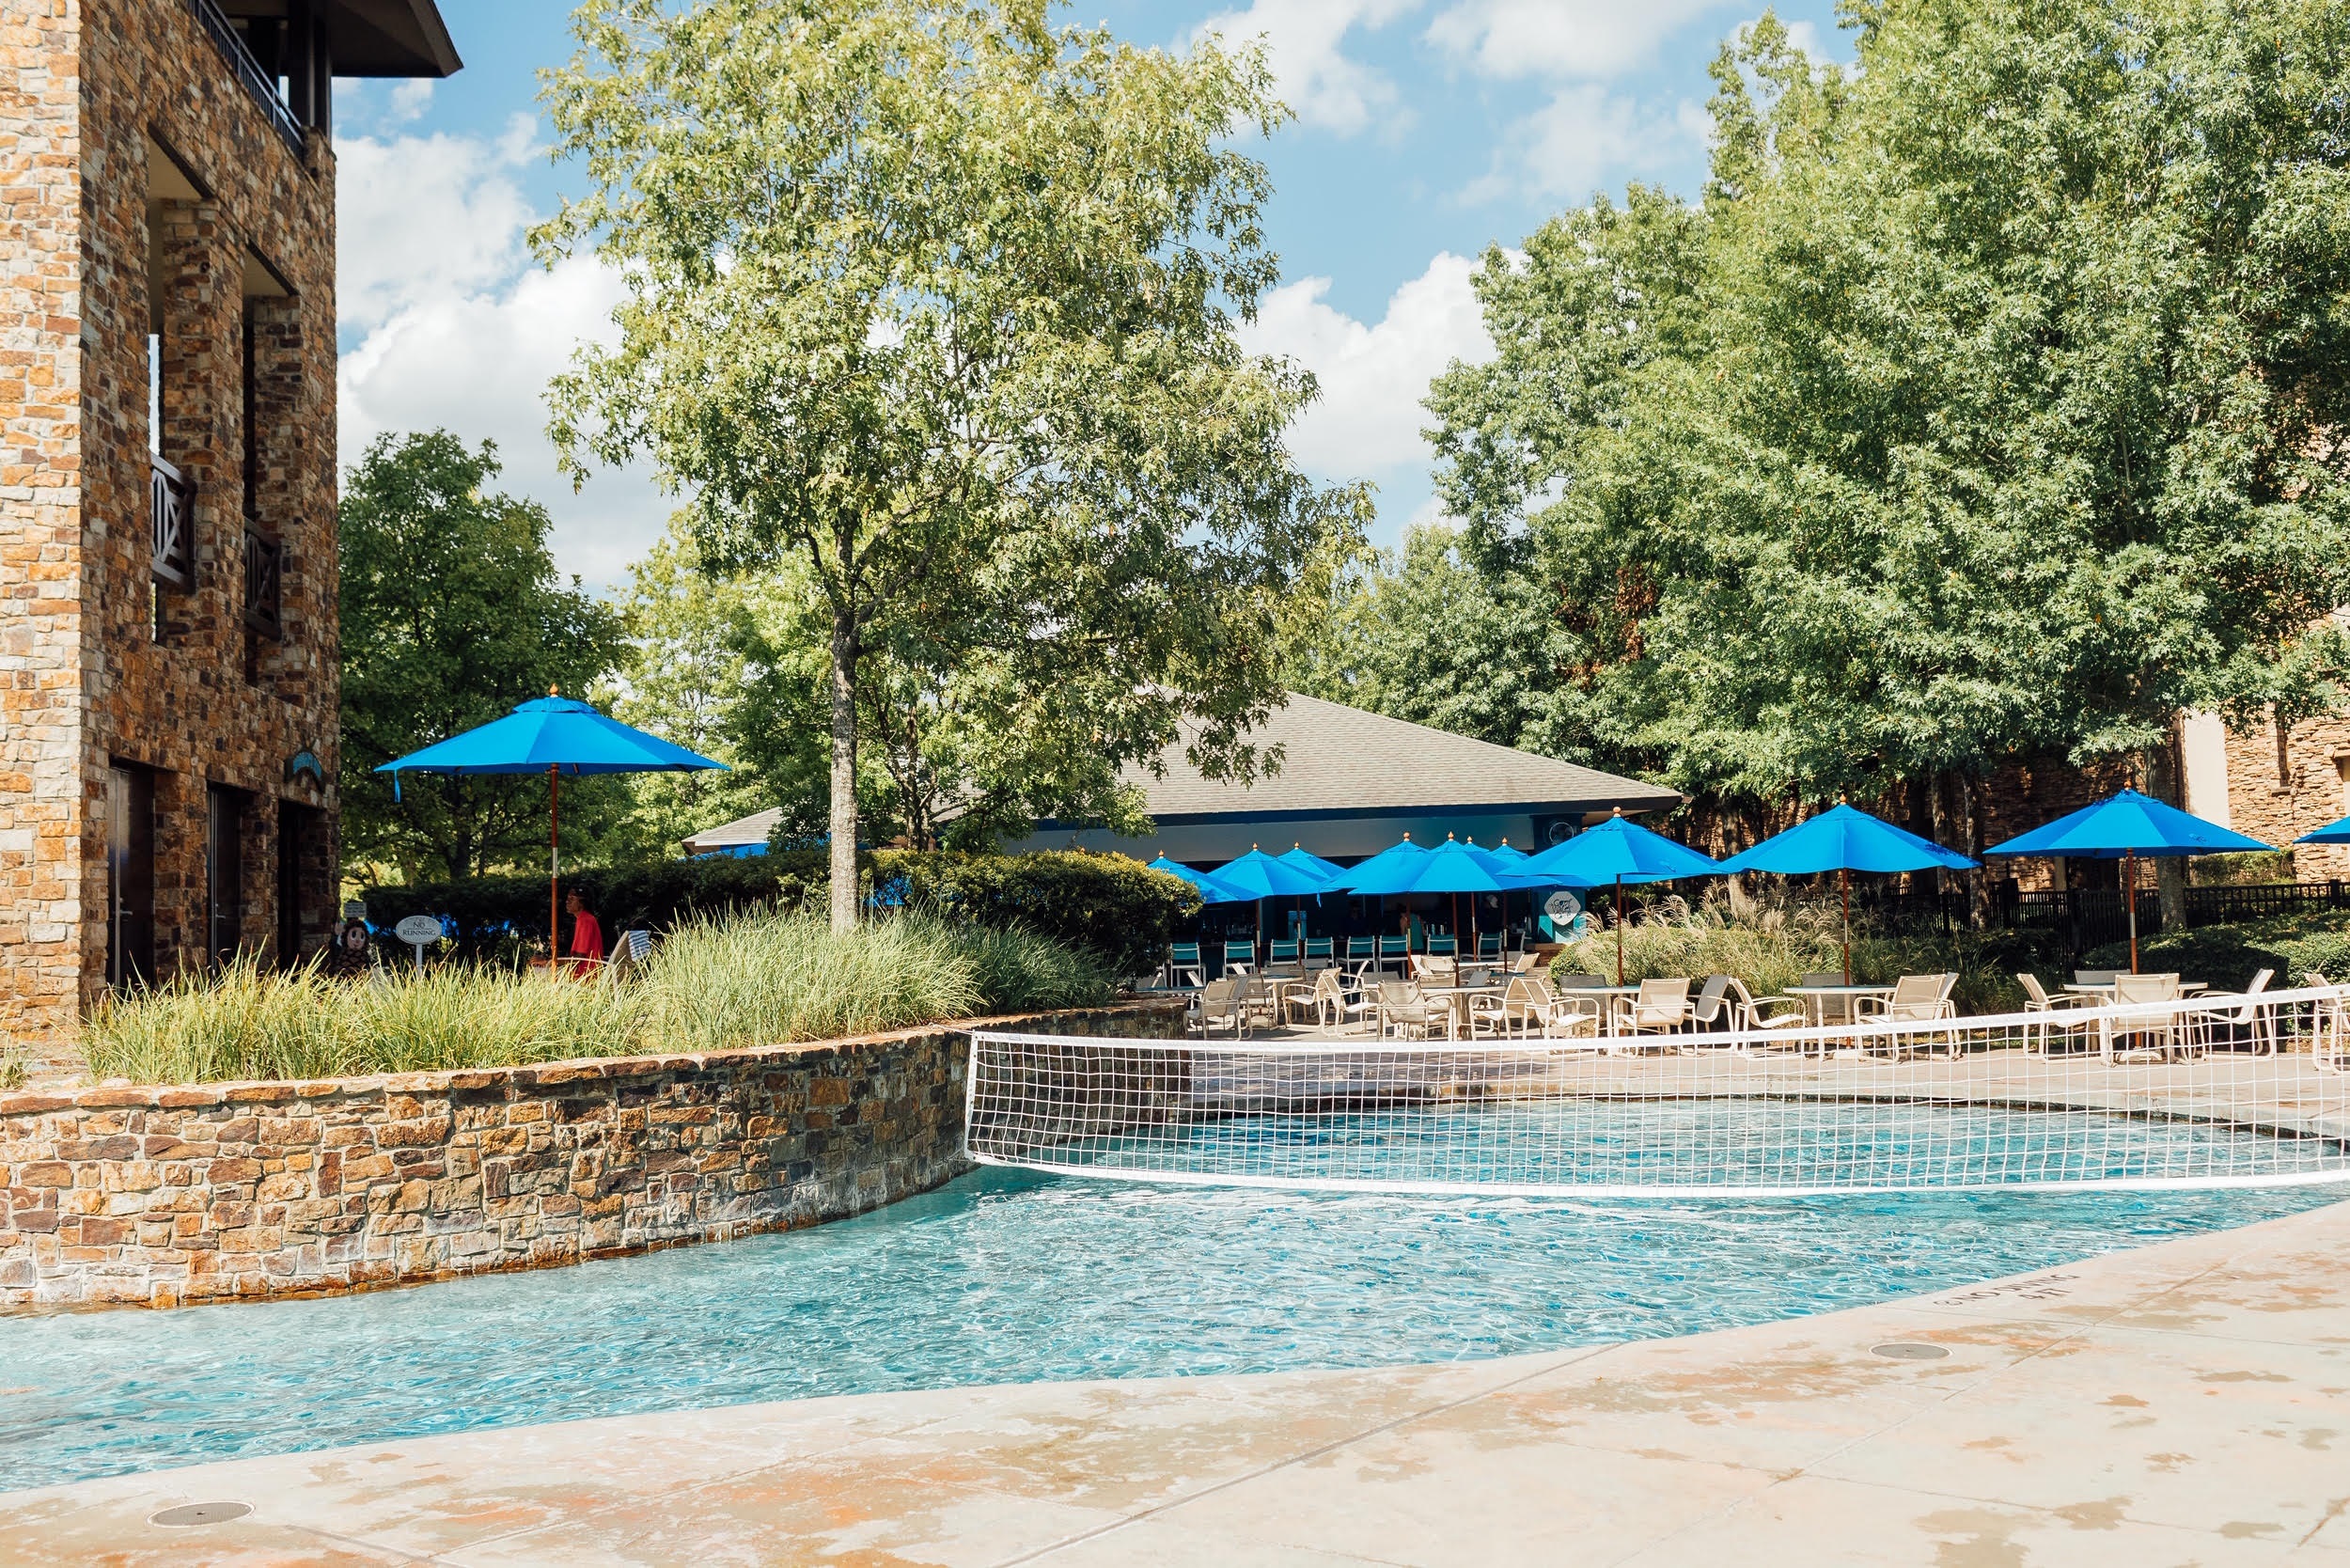 The Best Kid Friendly Resort in Woodlands, TX featured by top travel blogger, Walking in Memphis in High Heels